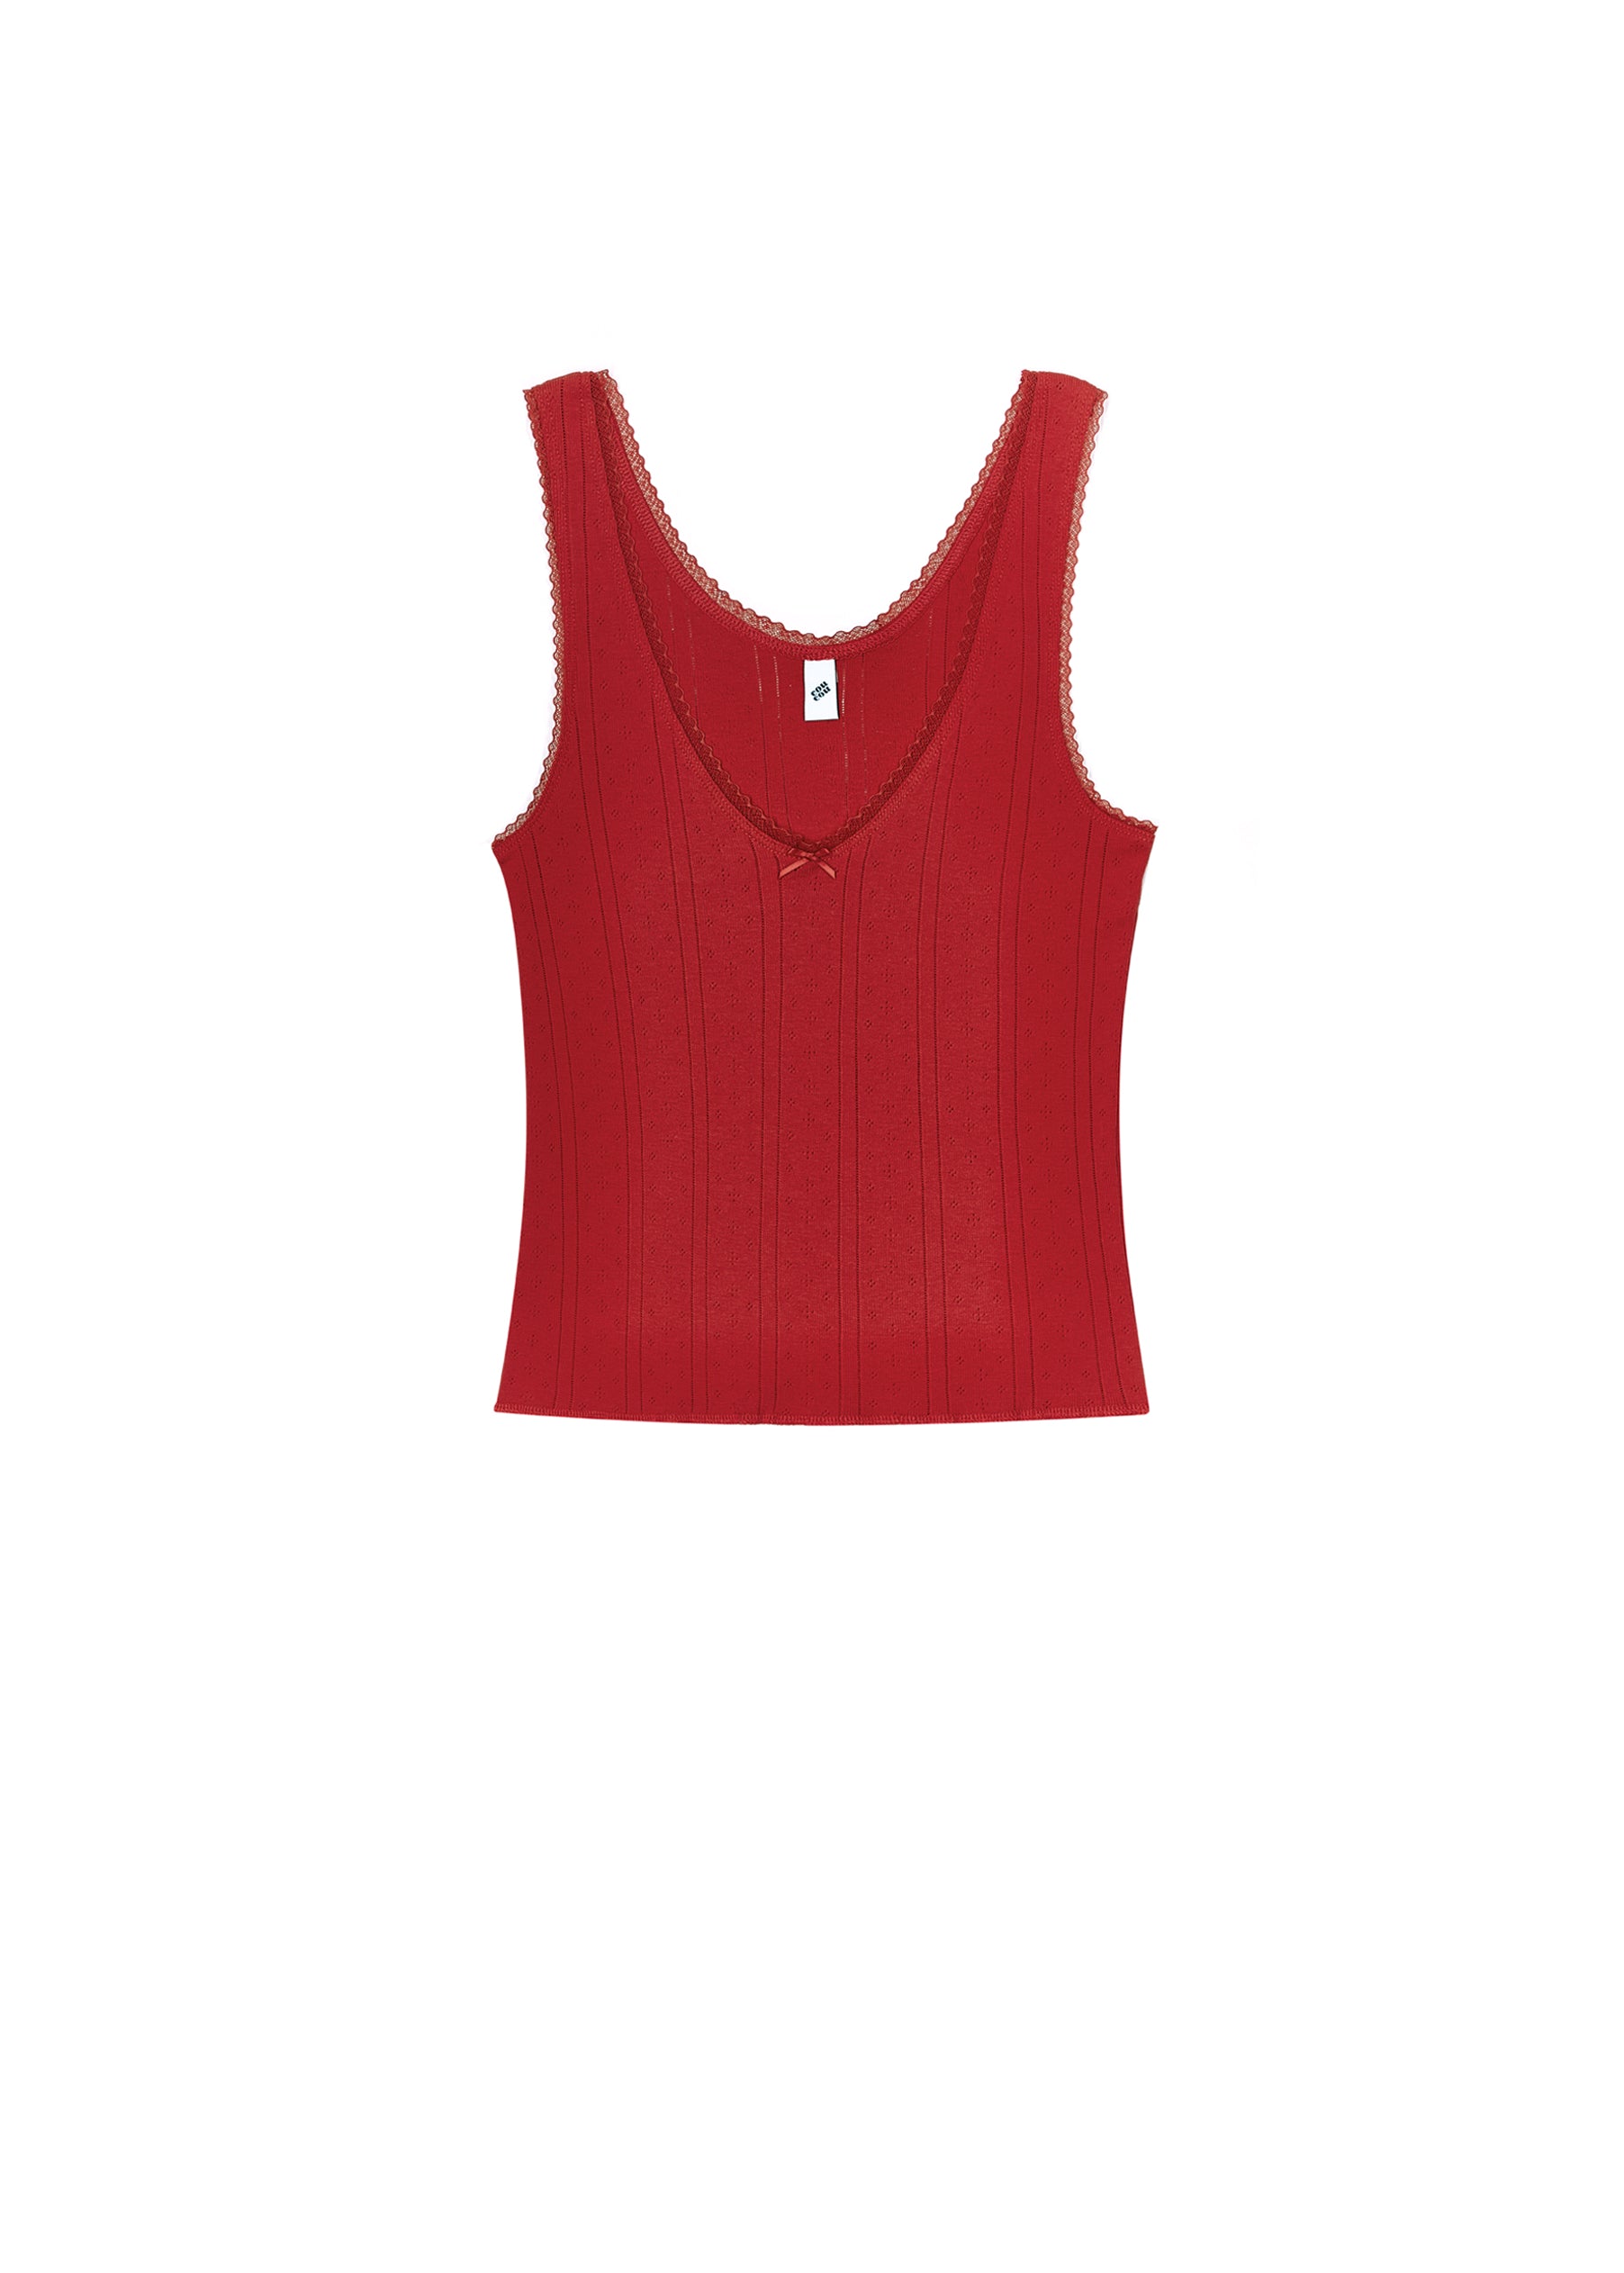 The Scoop Tank Cherry Red